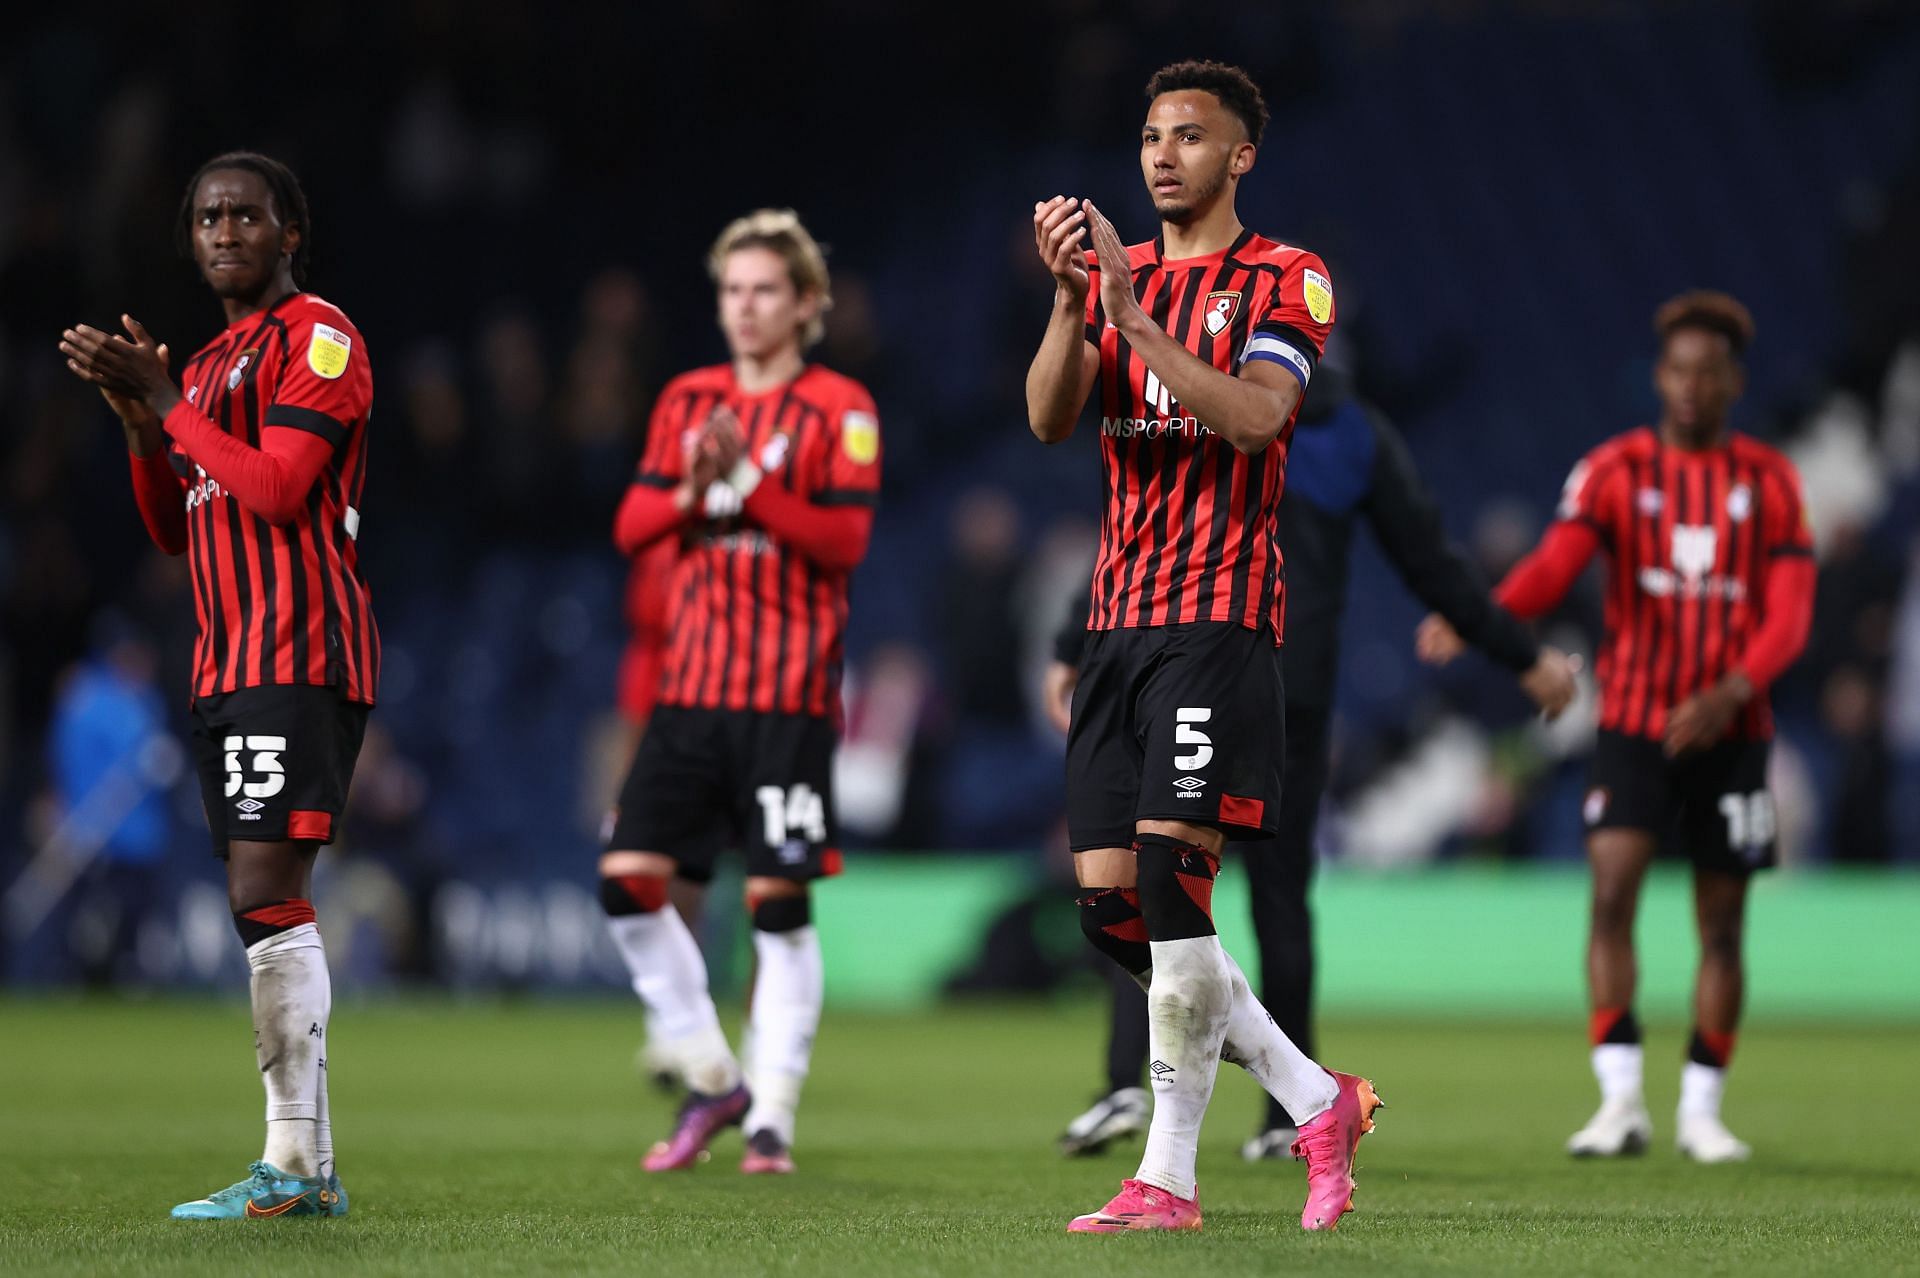 Bournemouth are close to securing promotion